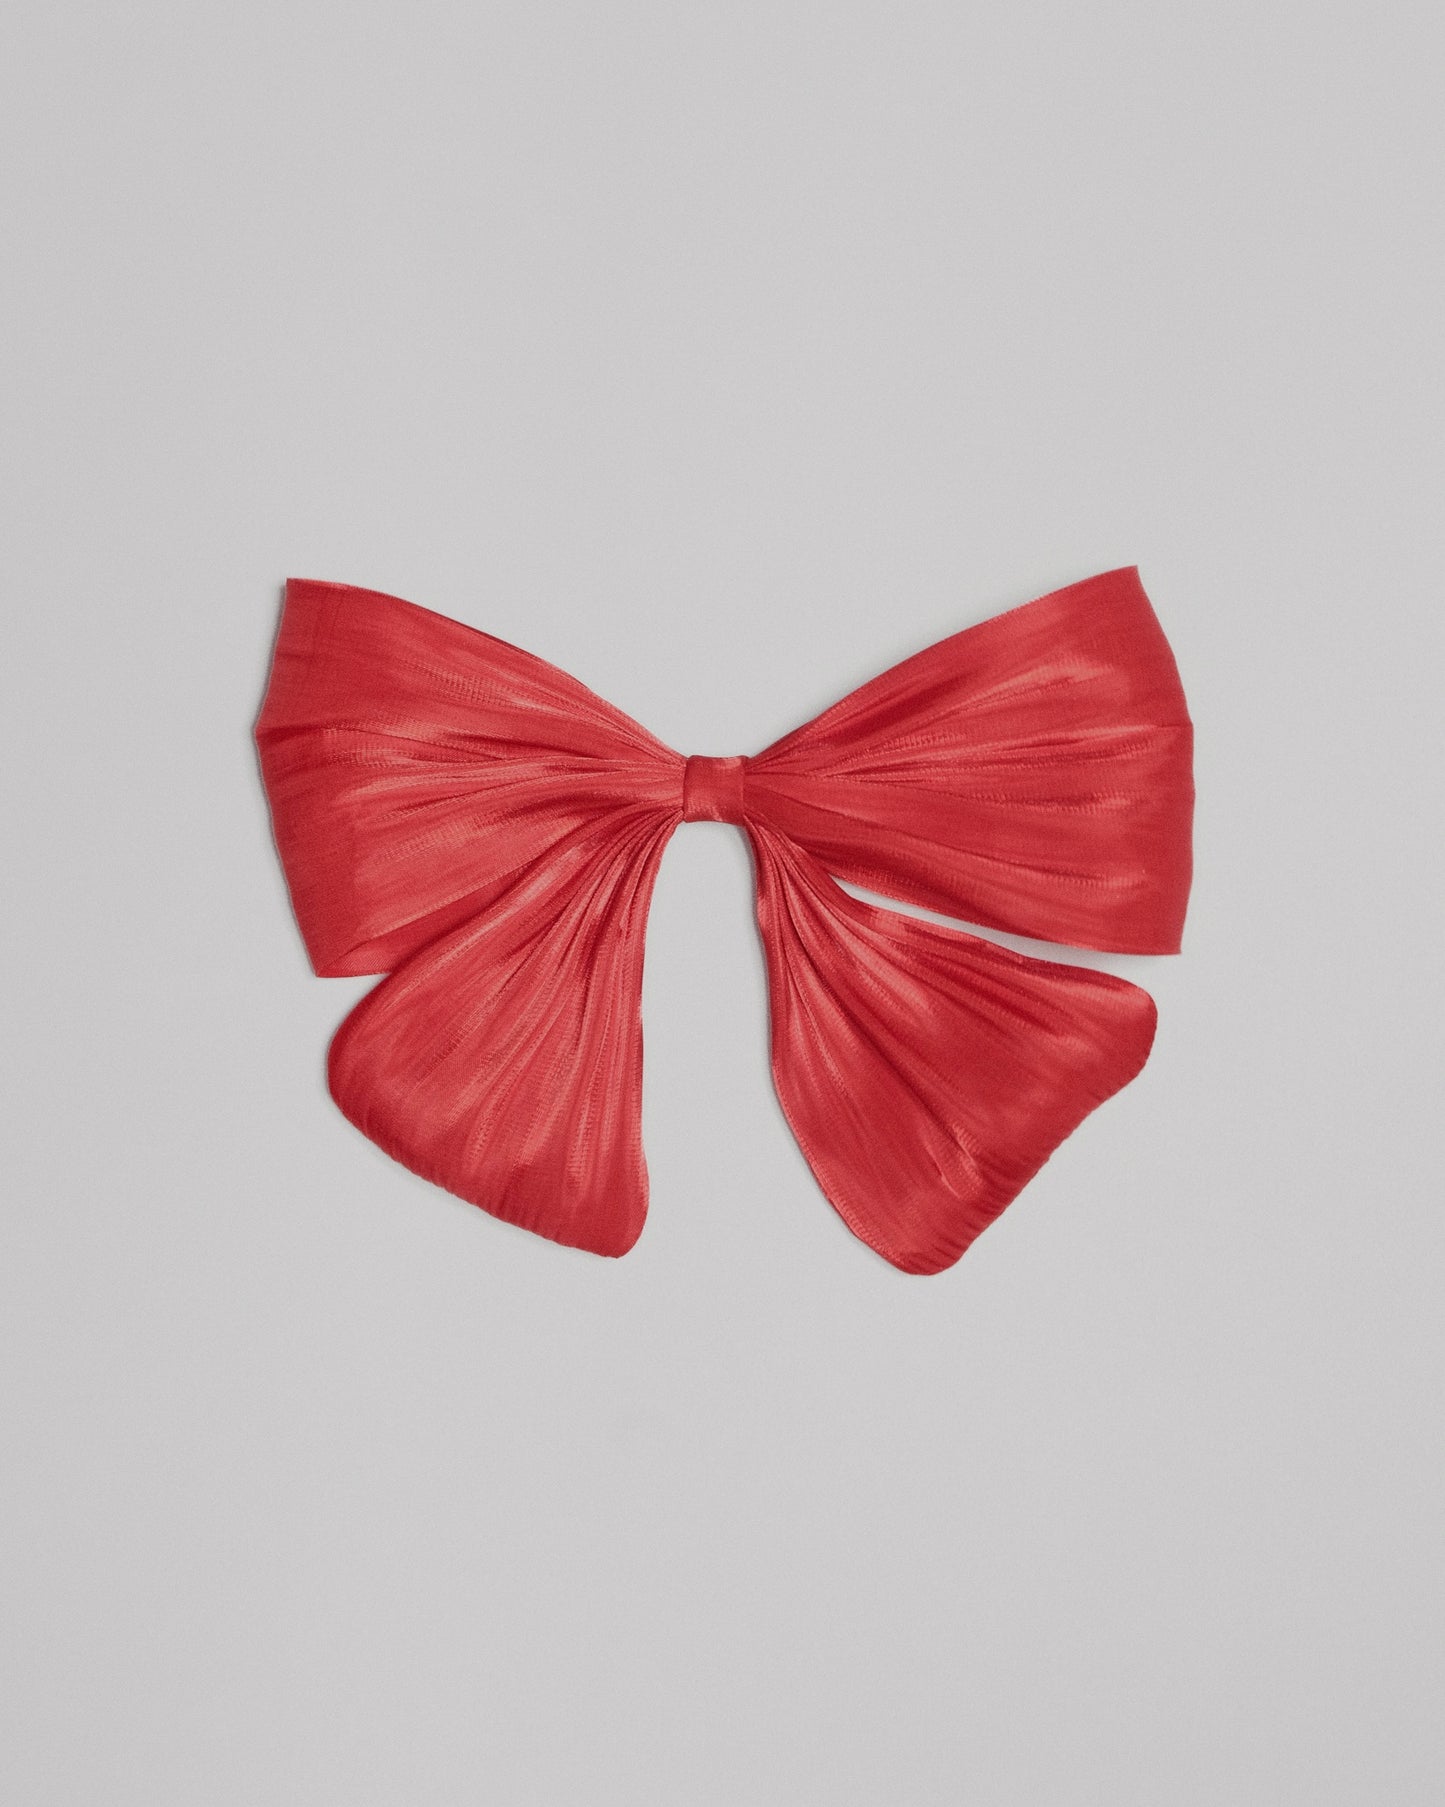 The Red Bow Wow